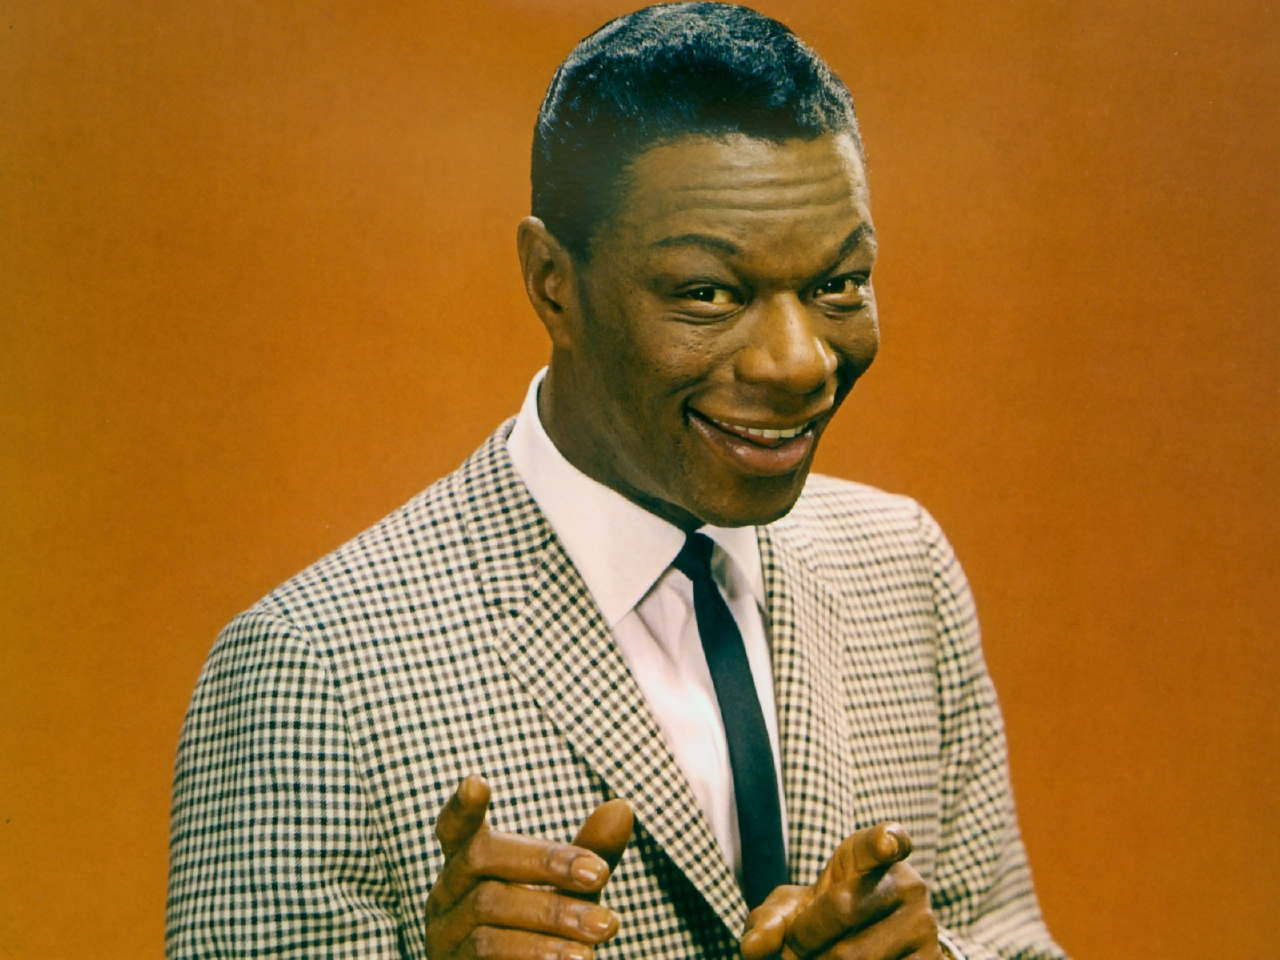 Legendary Nat King Cole in a Classic Photoshoot Wallpaper